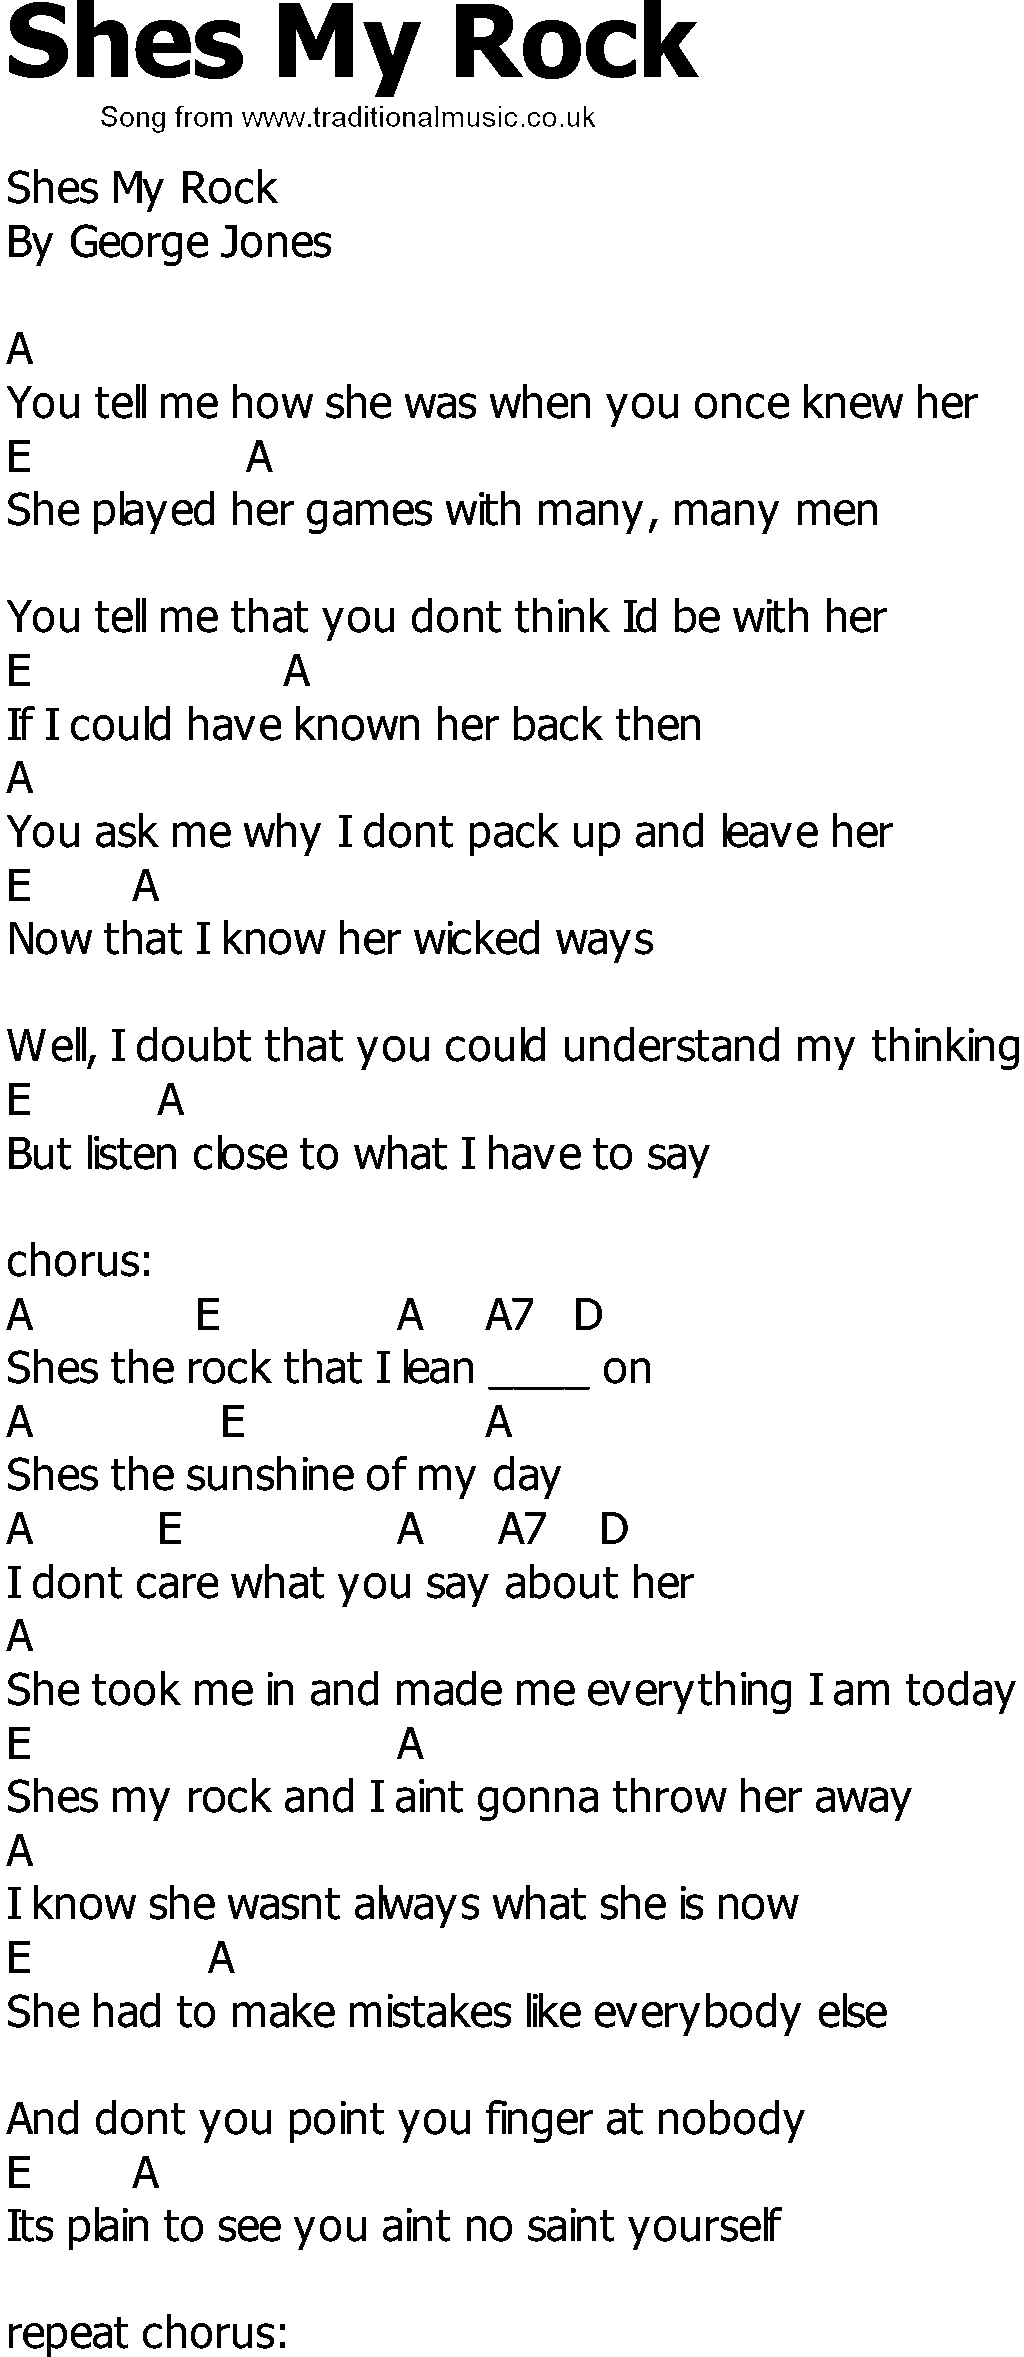 Old Country song lyrics with chords - Shes My Rock